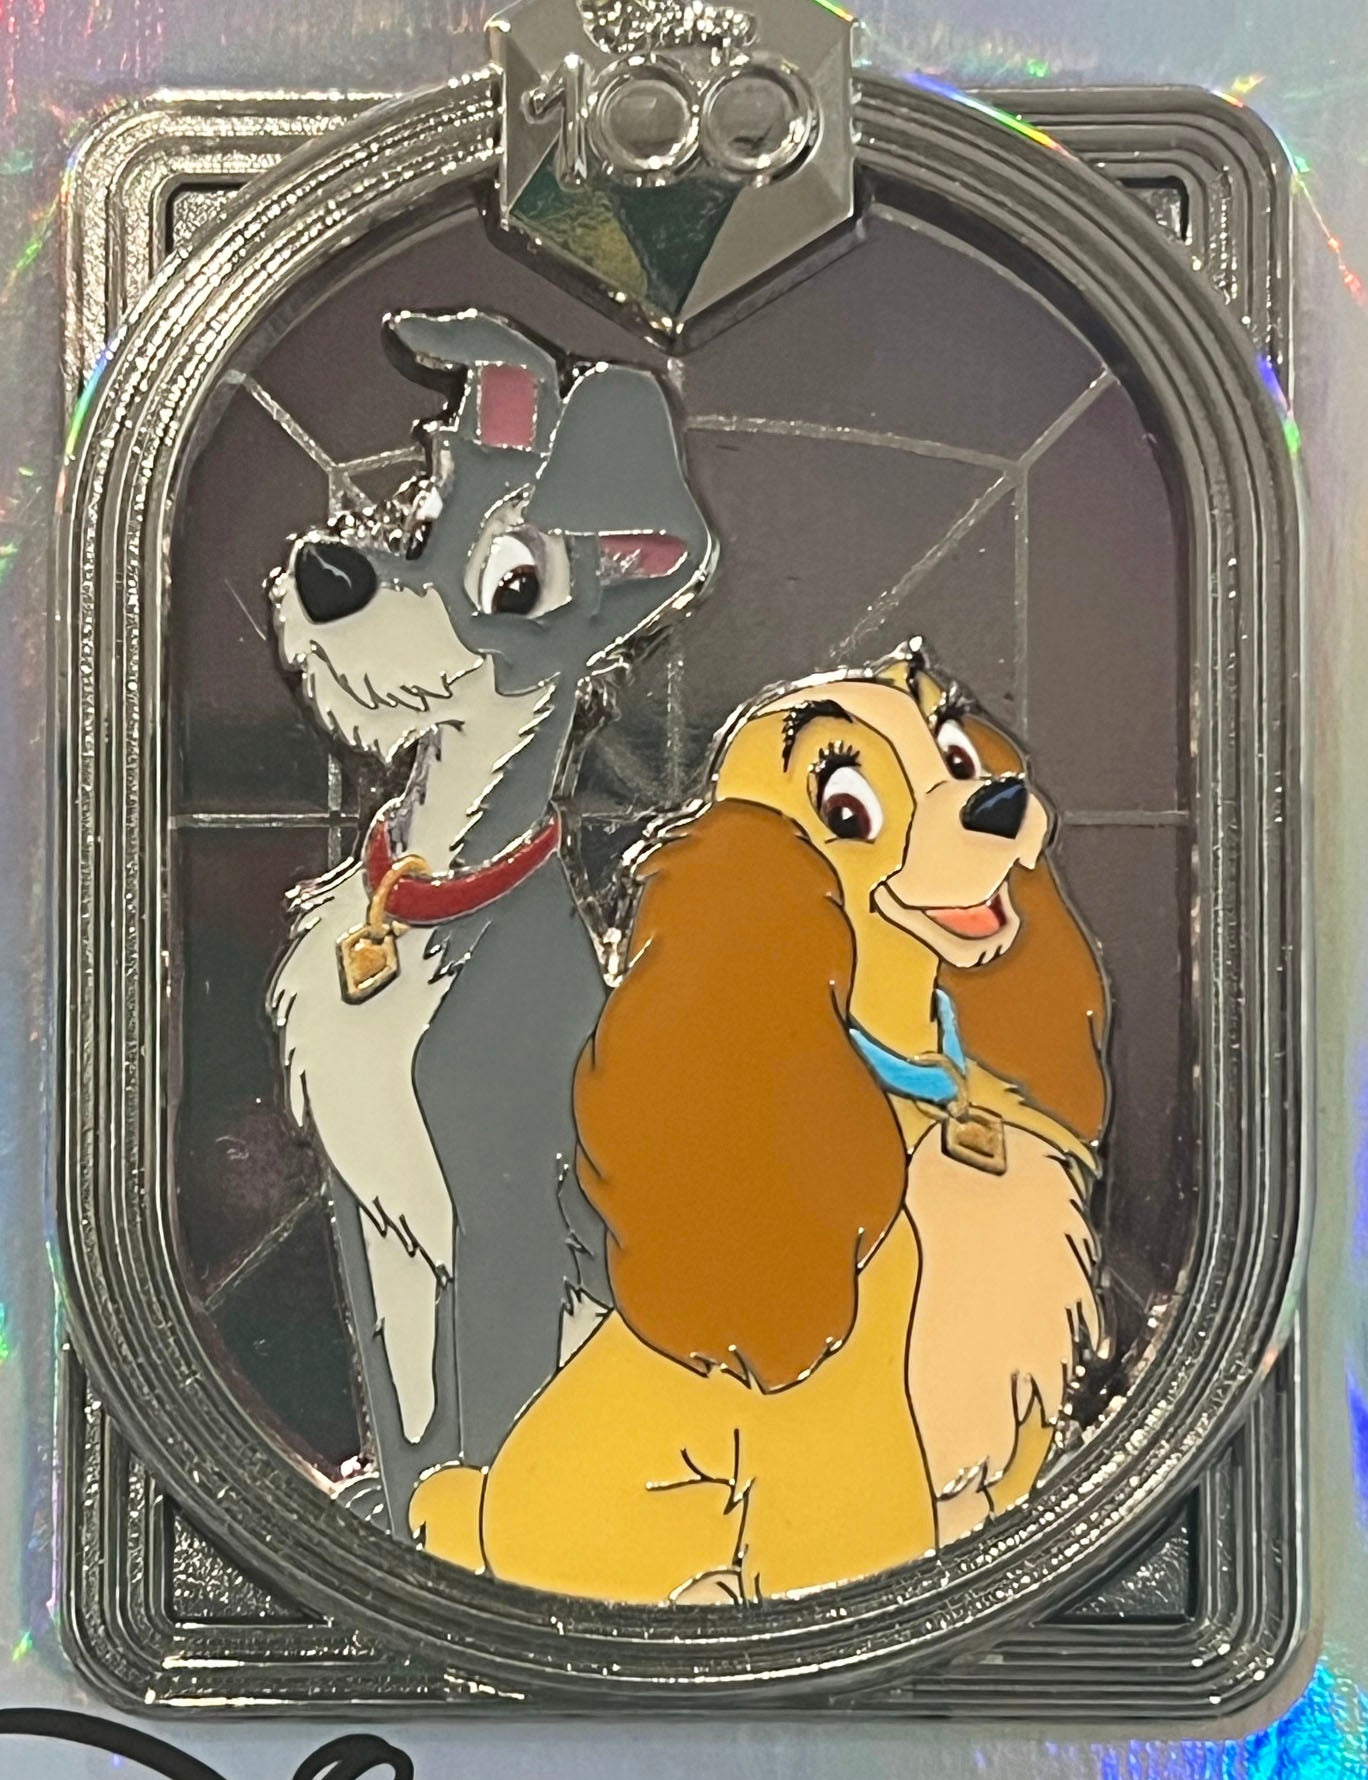 Beast-Kingdom USA  DS-136-Disney 100 Years of Wonder-Lady And The Tramp